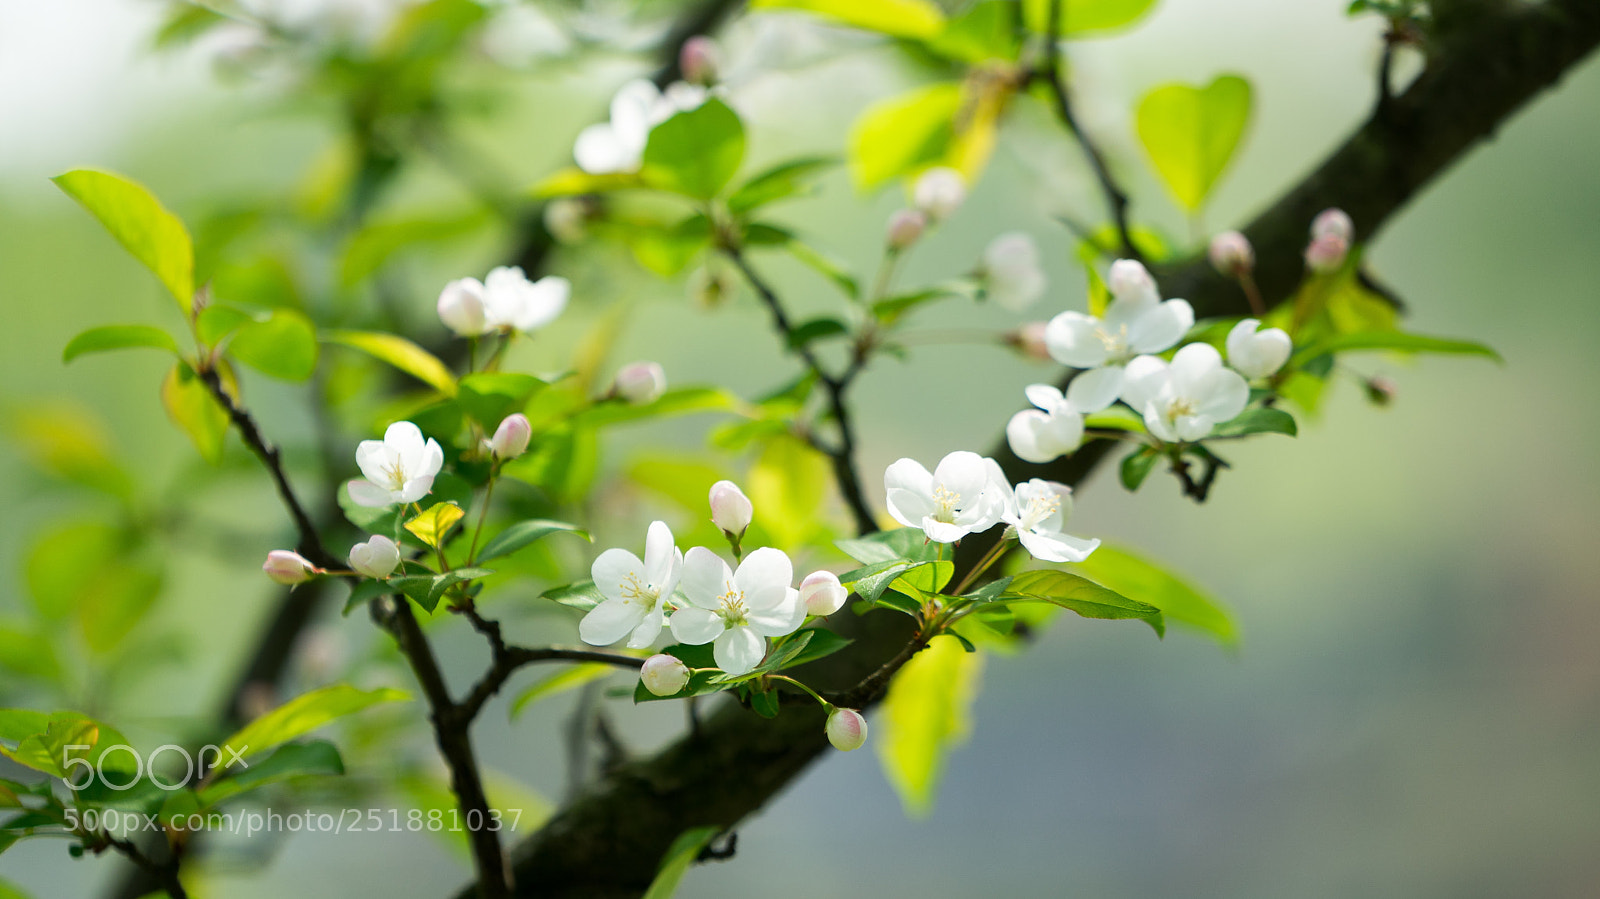 Sony a7 sample photo. Lovely spring photography